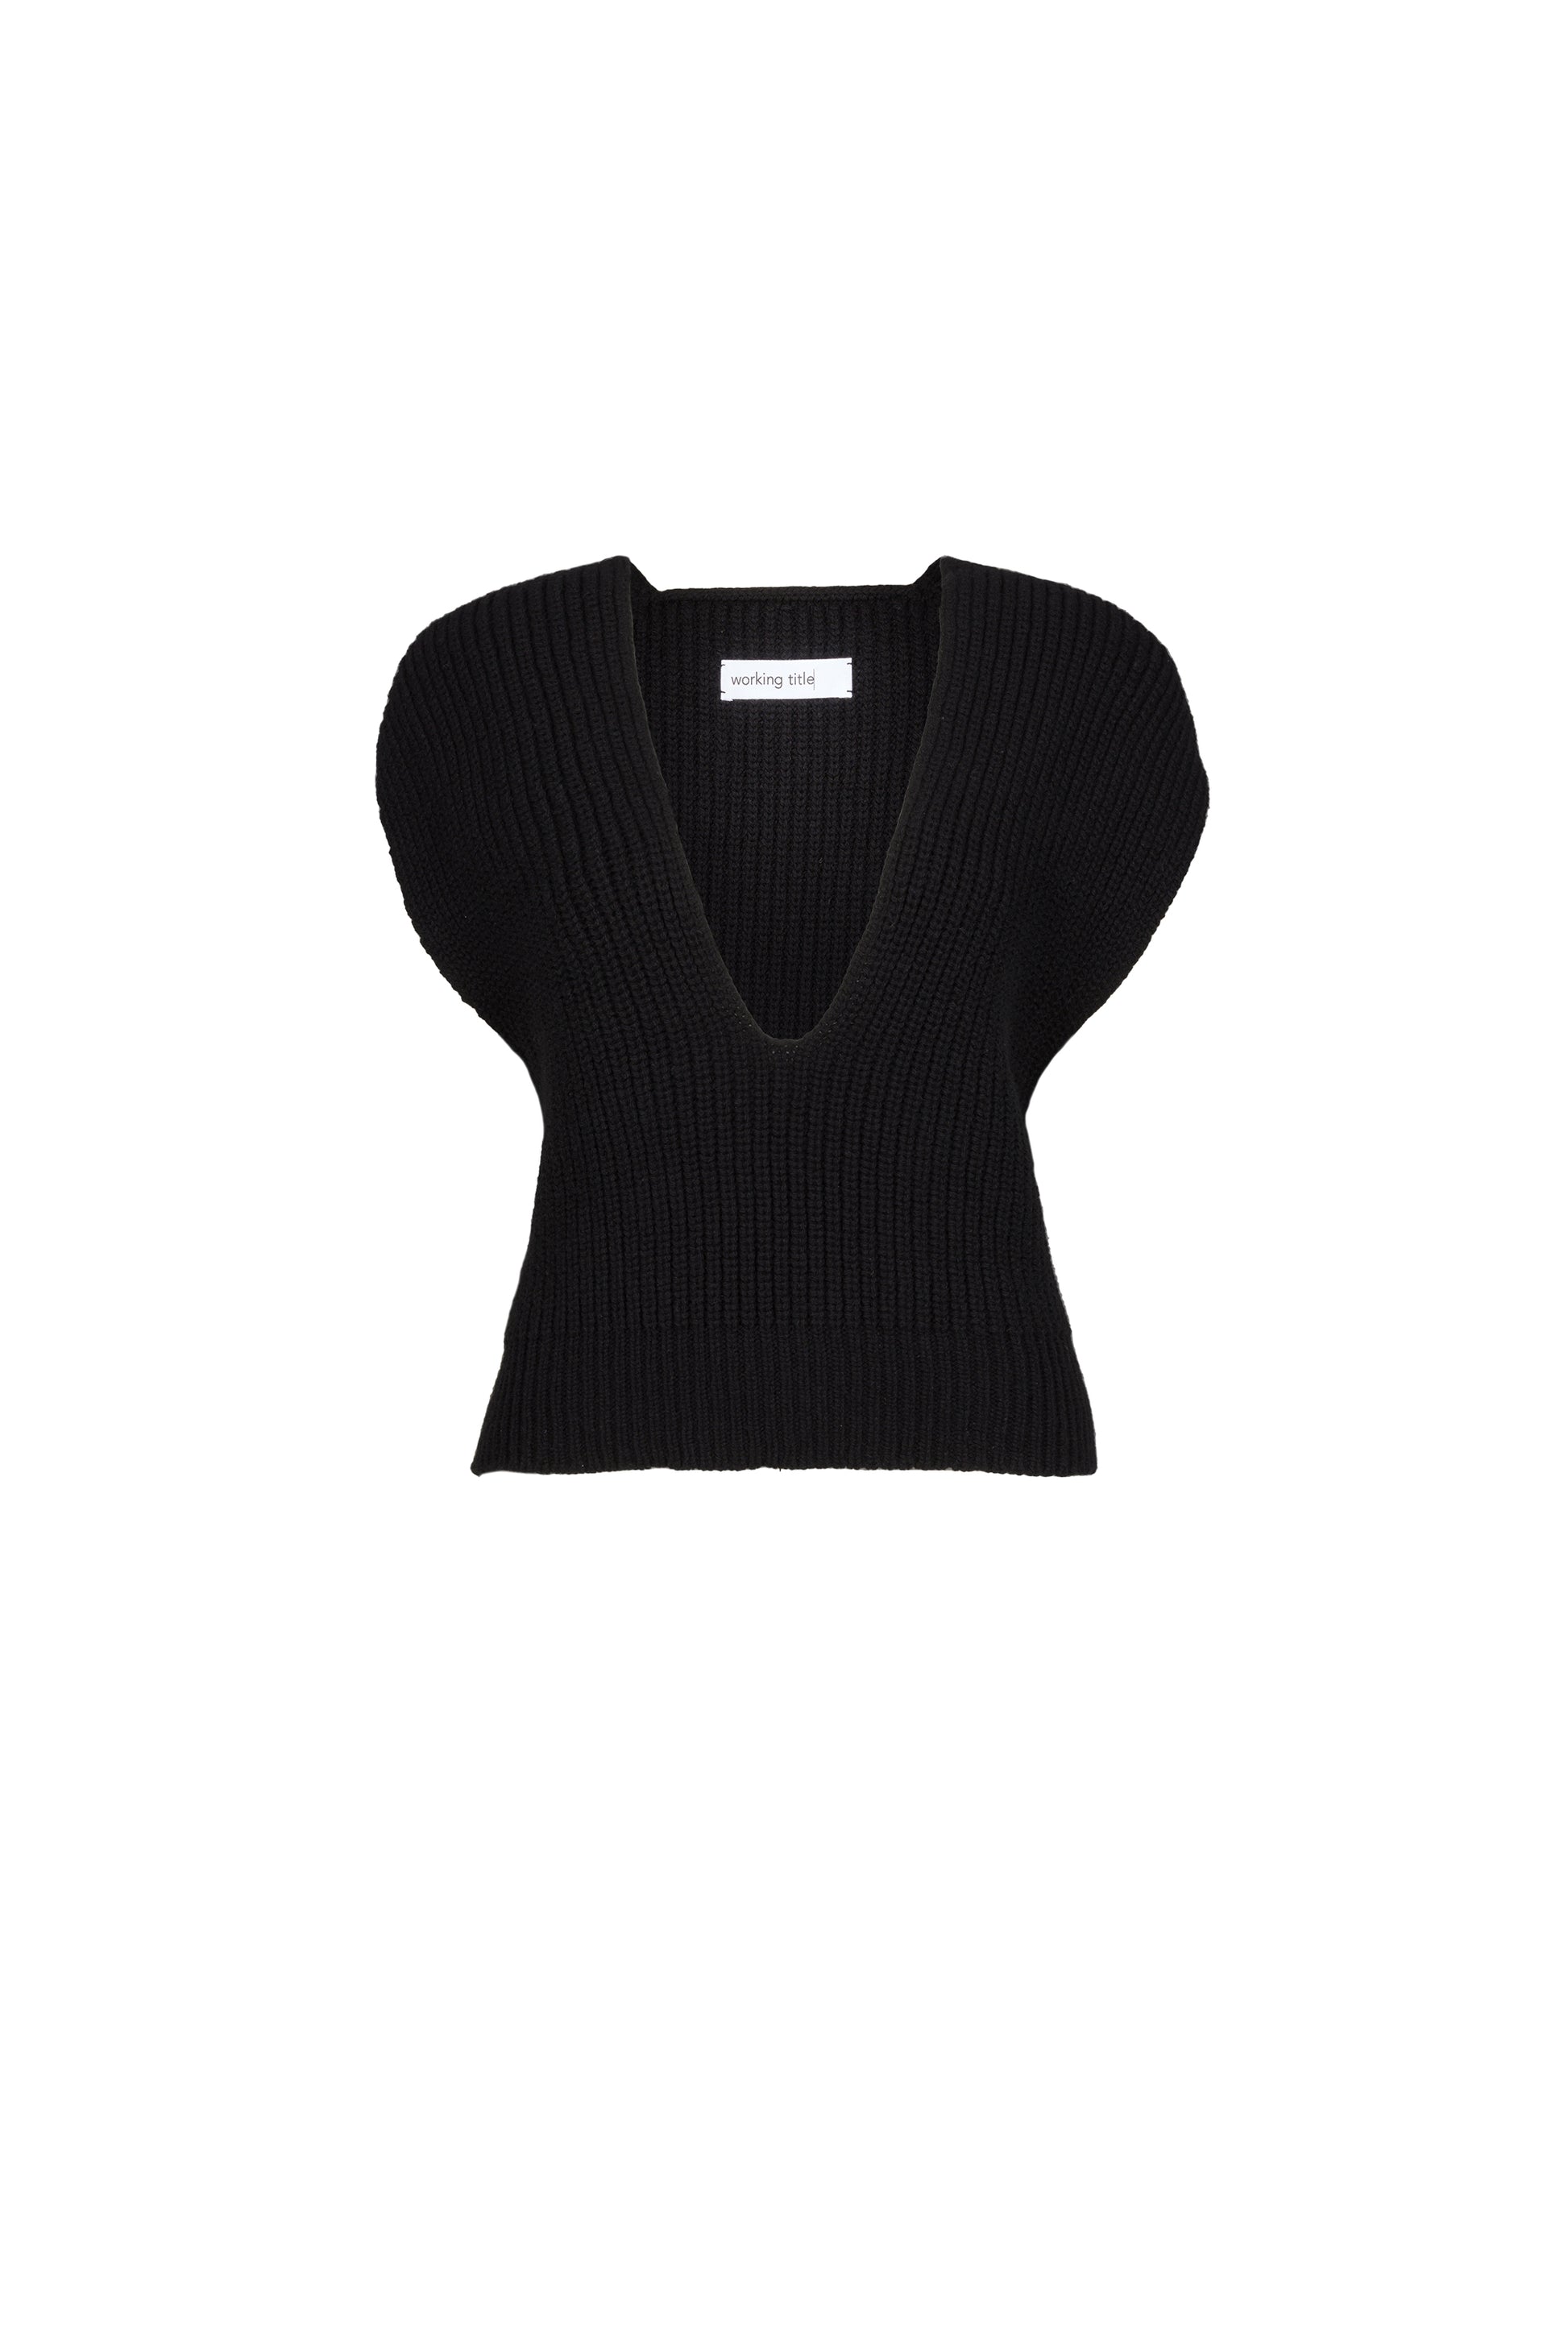 Chic black chunky knit sweater vest with a deep V-neckline and a relaxed, comfortable fit for a versatile and stylish layering piece